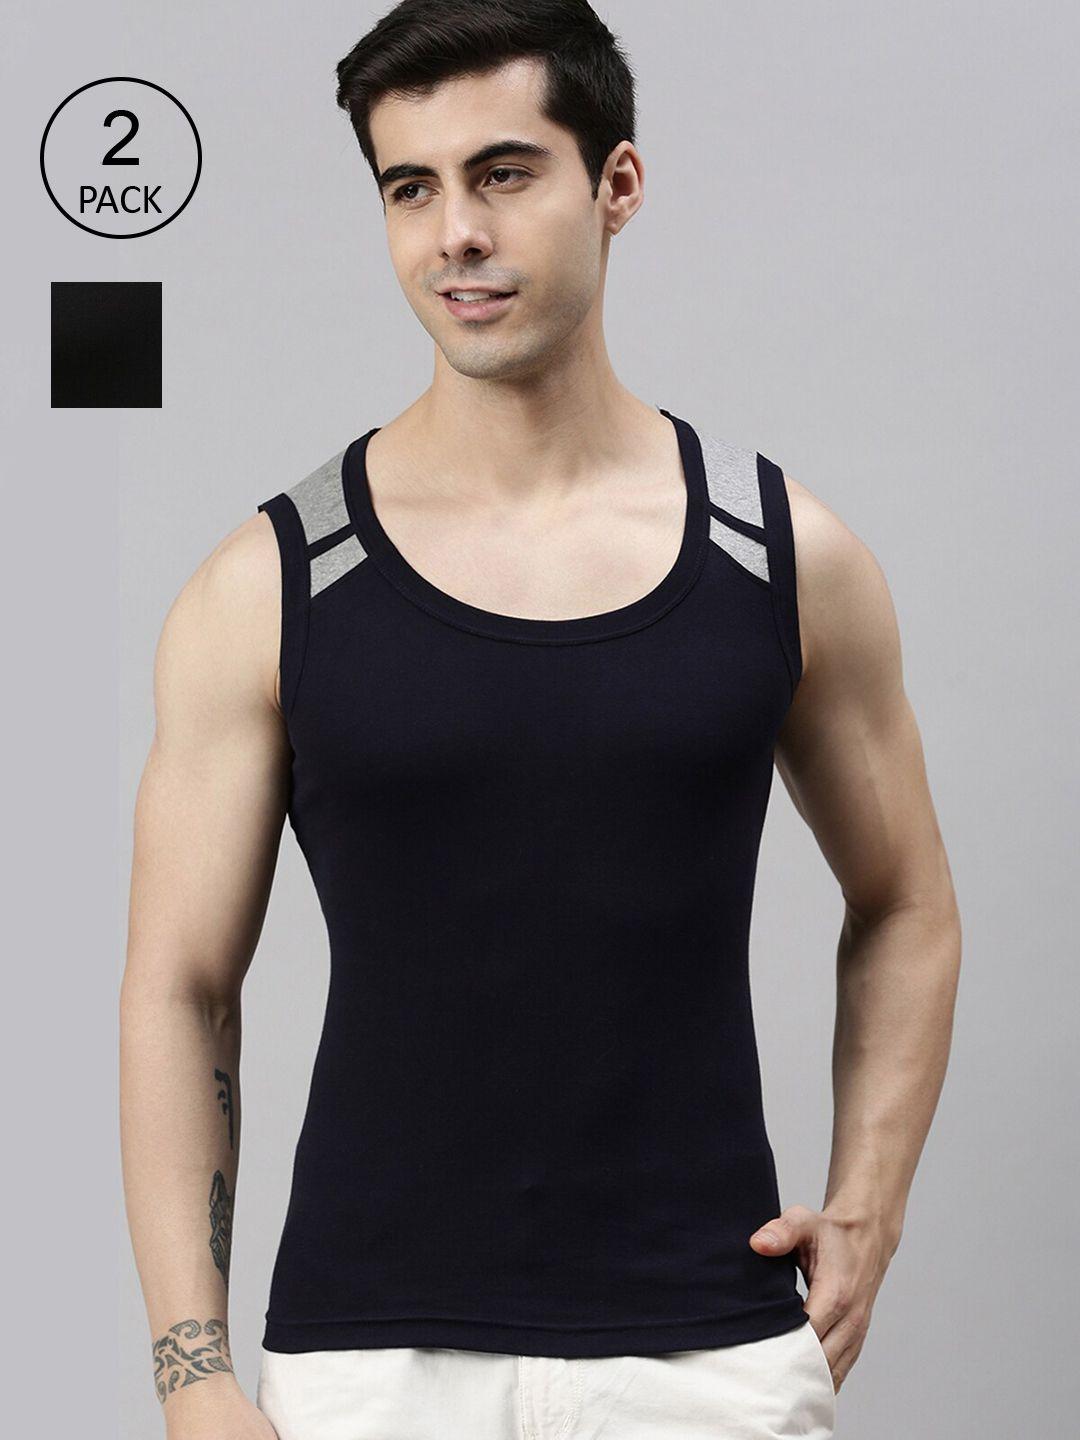 lux cozi men pack of 2 black & navy blue solid pure cotton innerwear vests